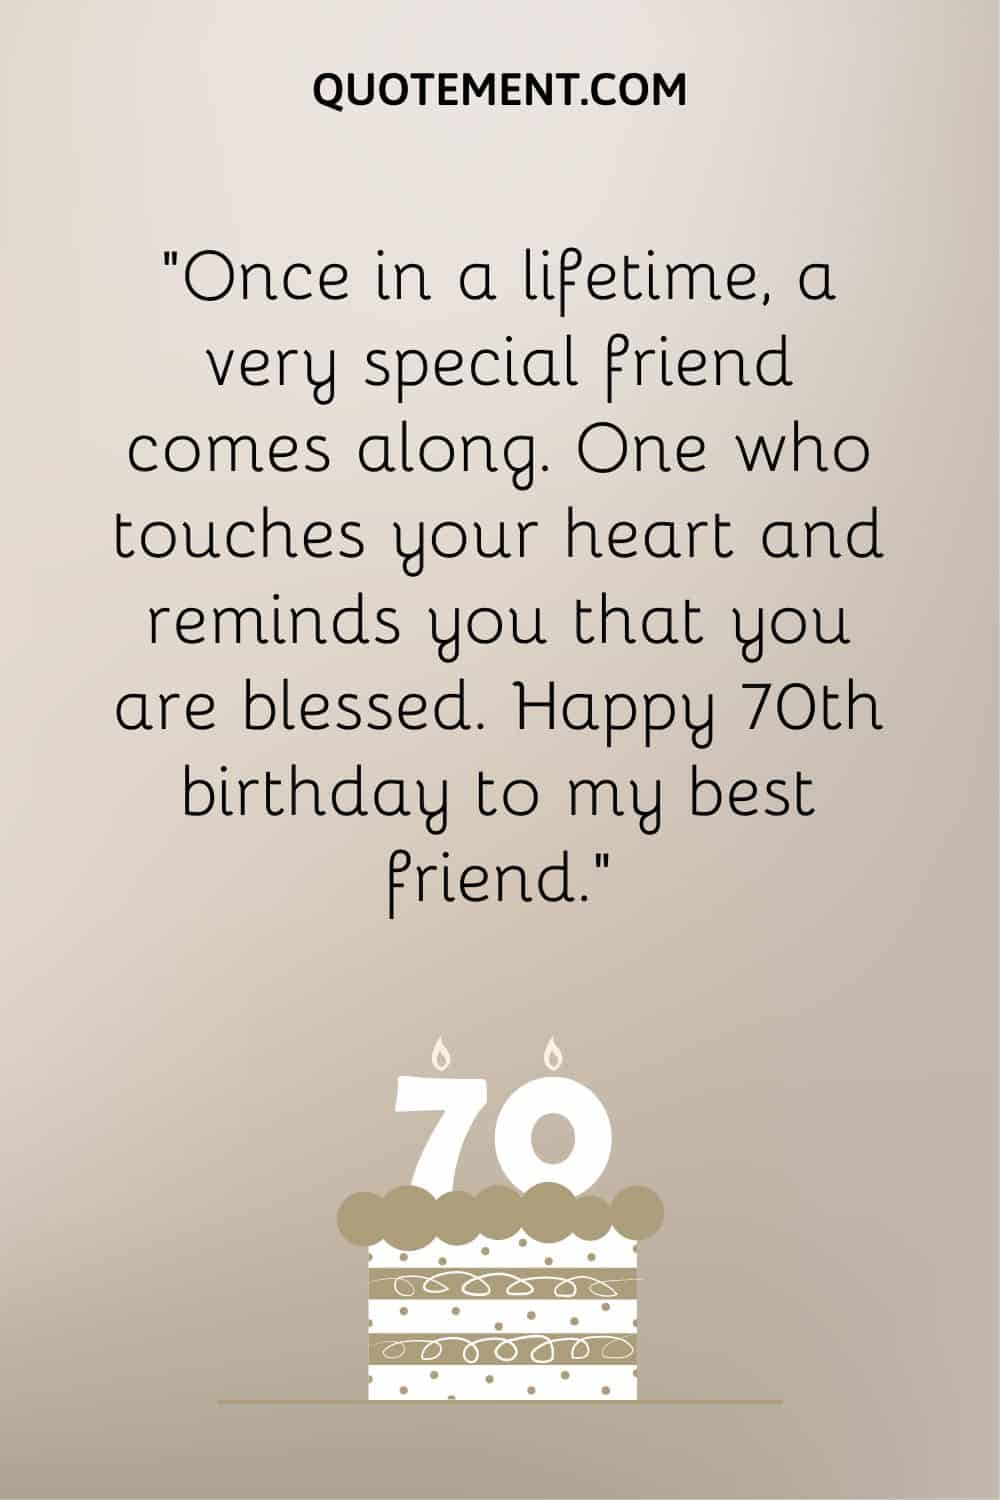 “Once in a lifetime, a very special friend comes along. One who touches your heart and reminds you that you are blessed. Happy 70th birthday to my best friend.”